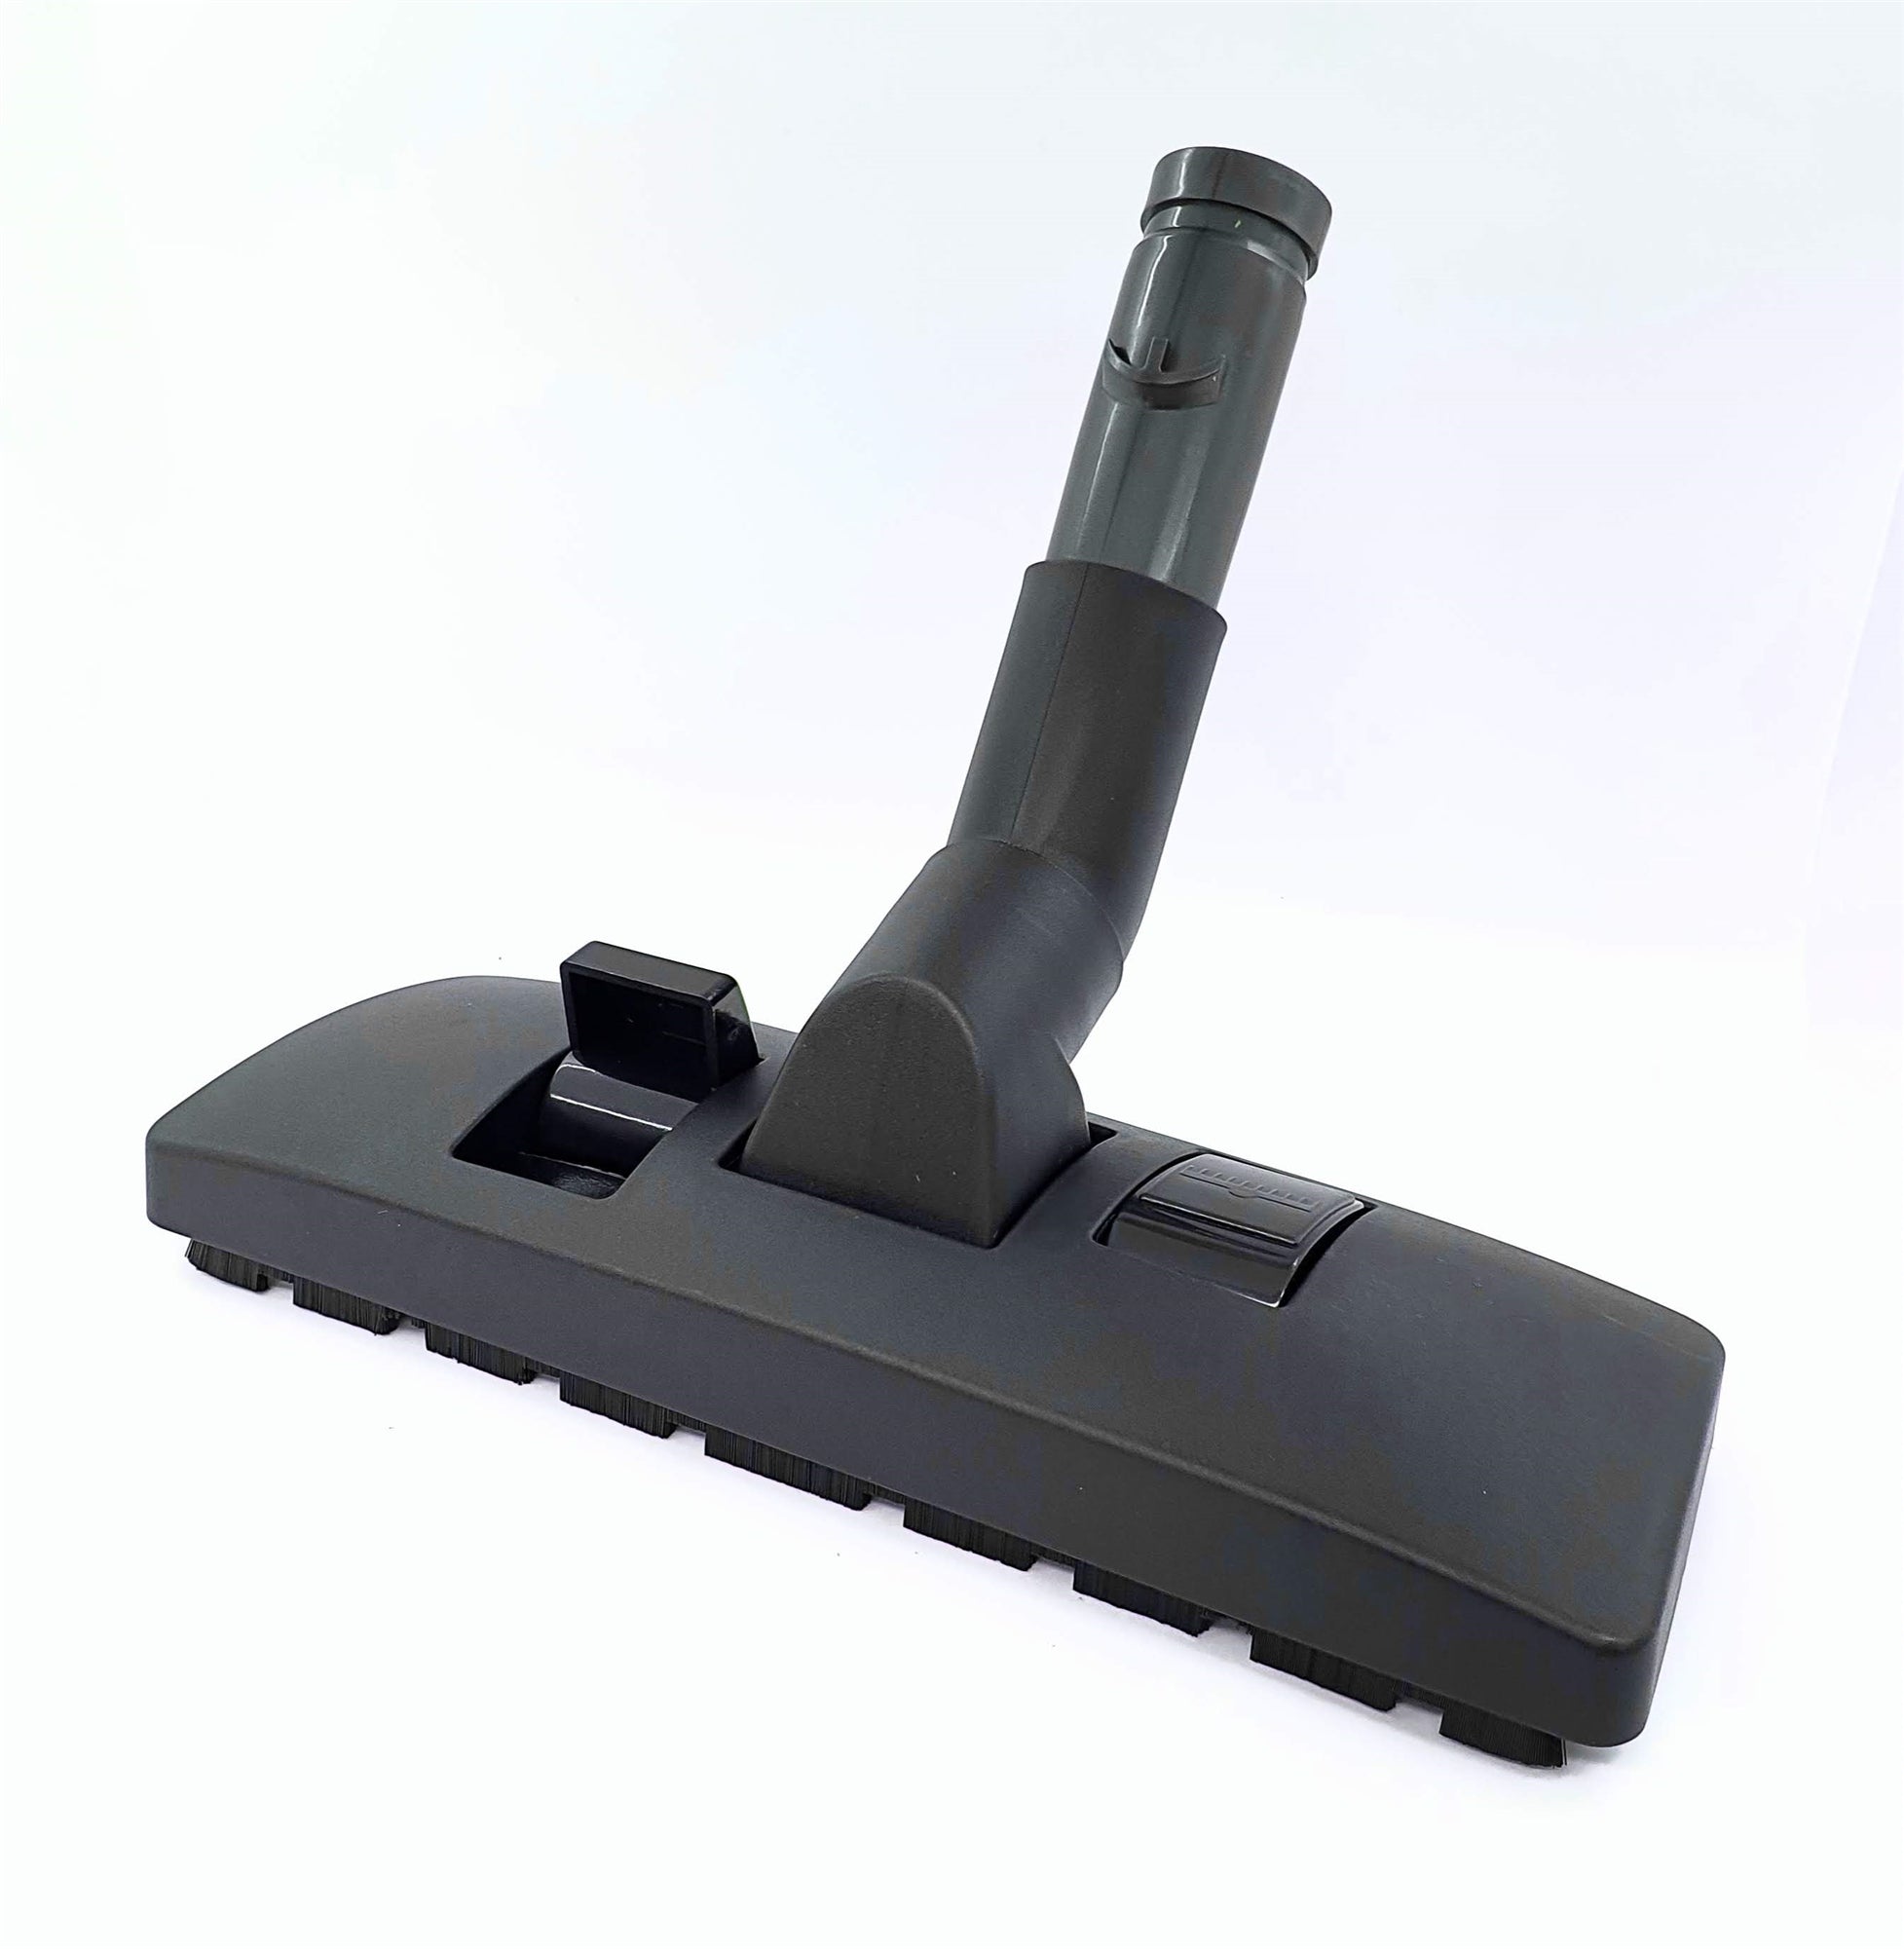 Floor tool for DYSON DC23, DC29, DC37, DC39 , DC54 & more